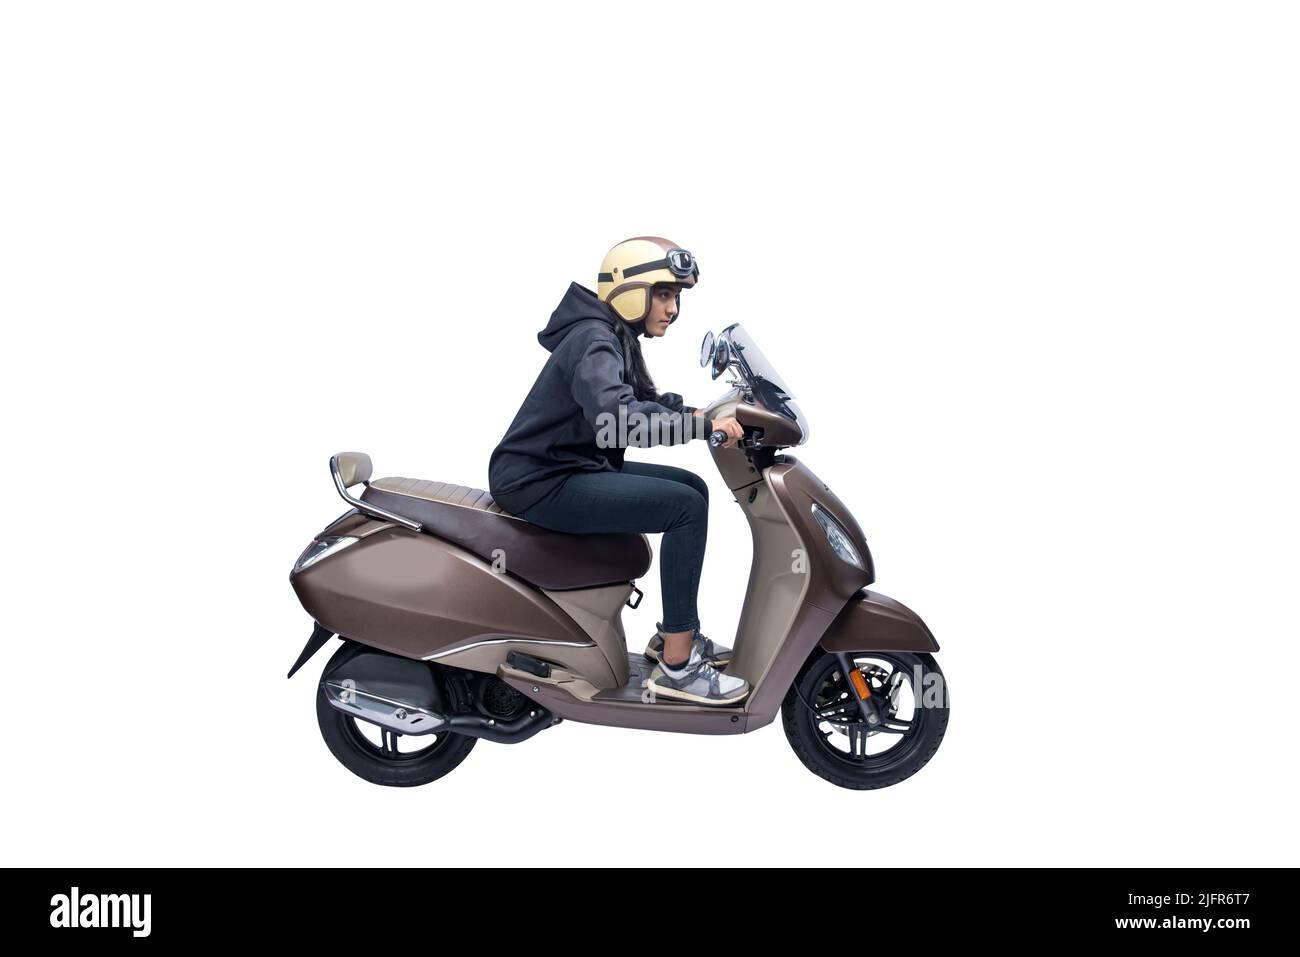 Asian woman with a helmet and jacket sitting on a scooter isolated over white background Stock Photo